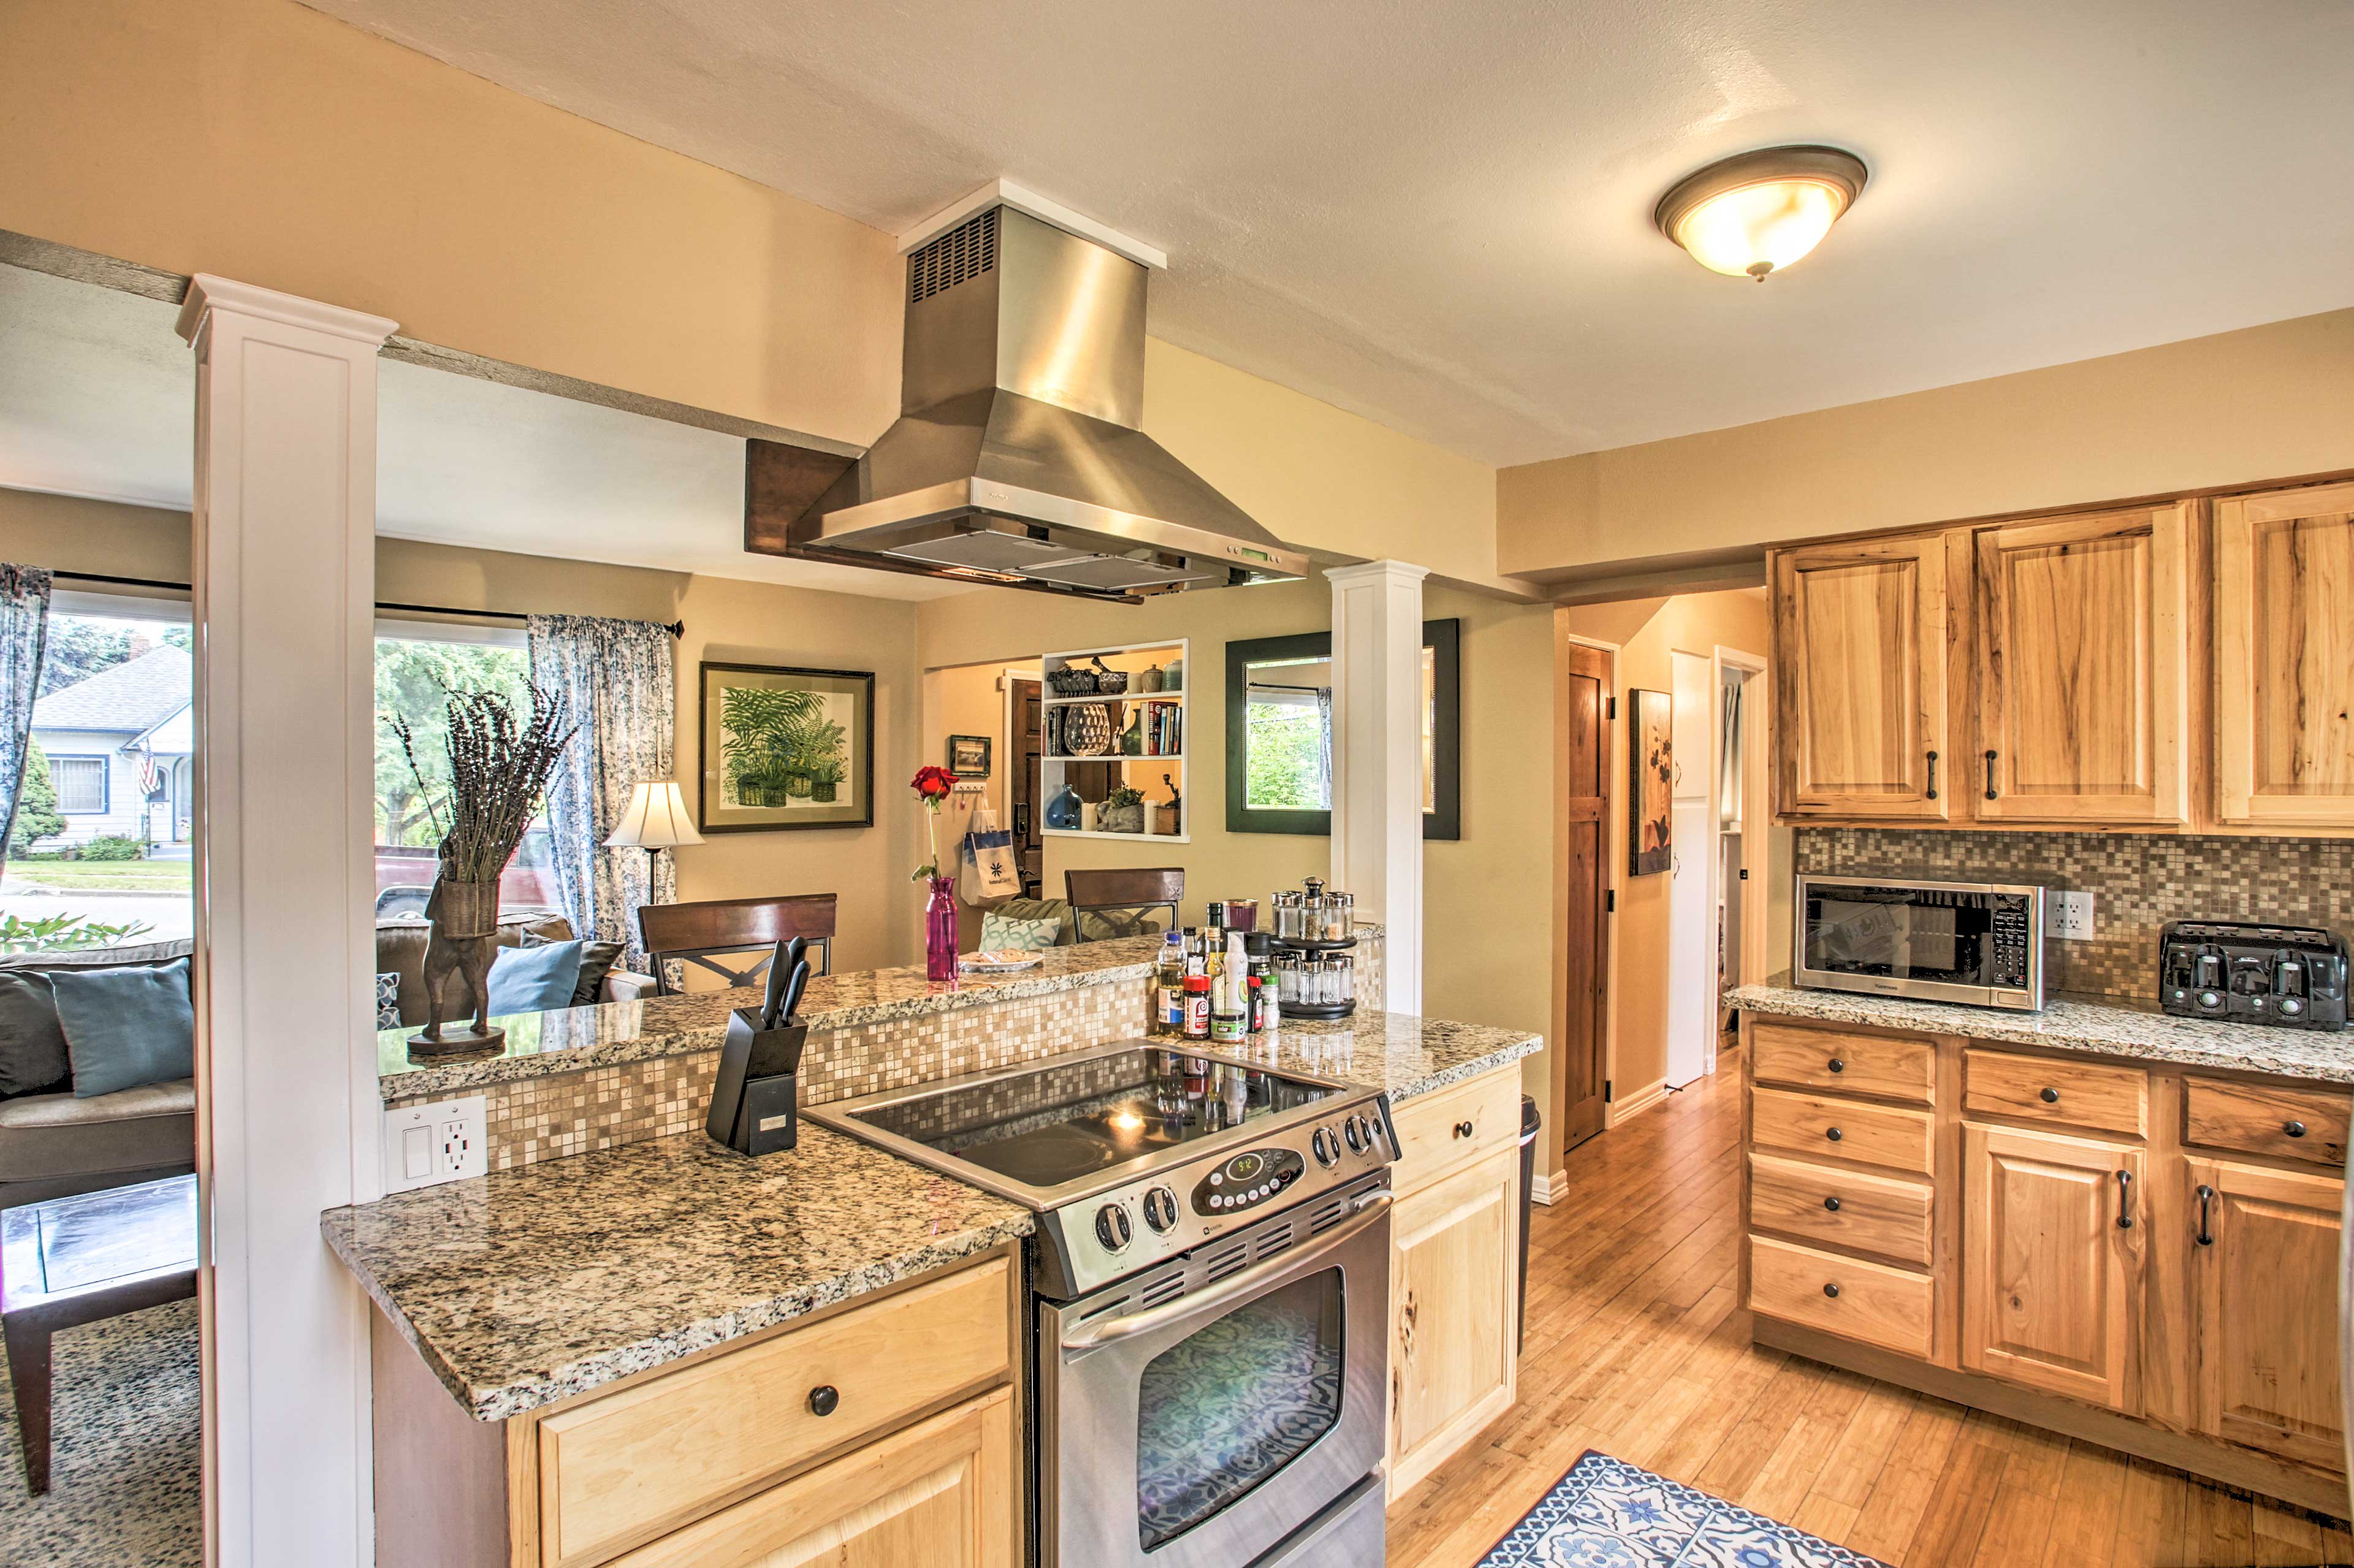 The kitchen is fully equipped with appliances, spices, and all the basics.